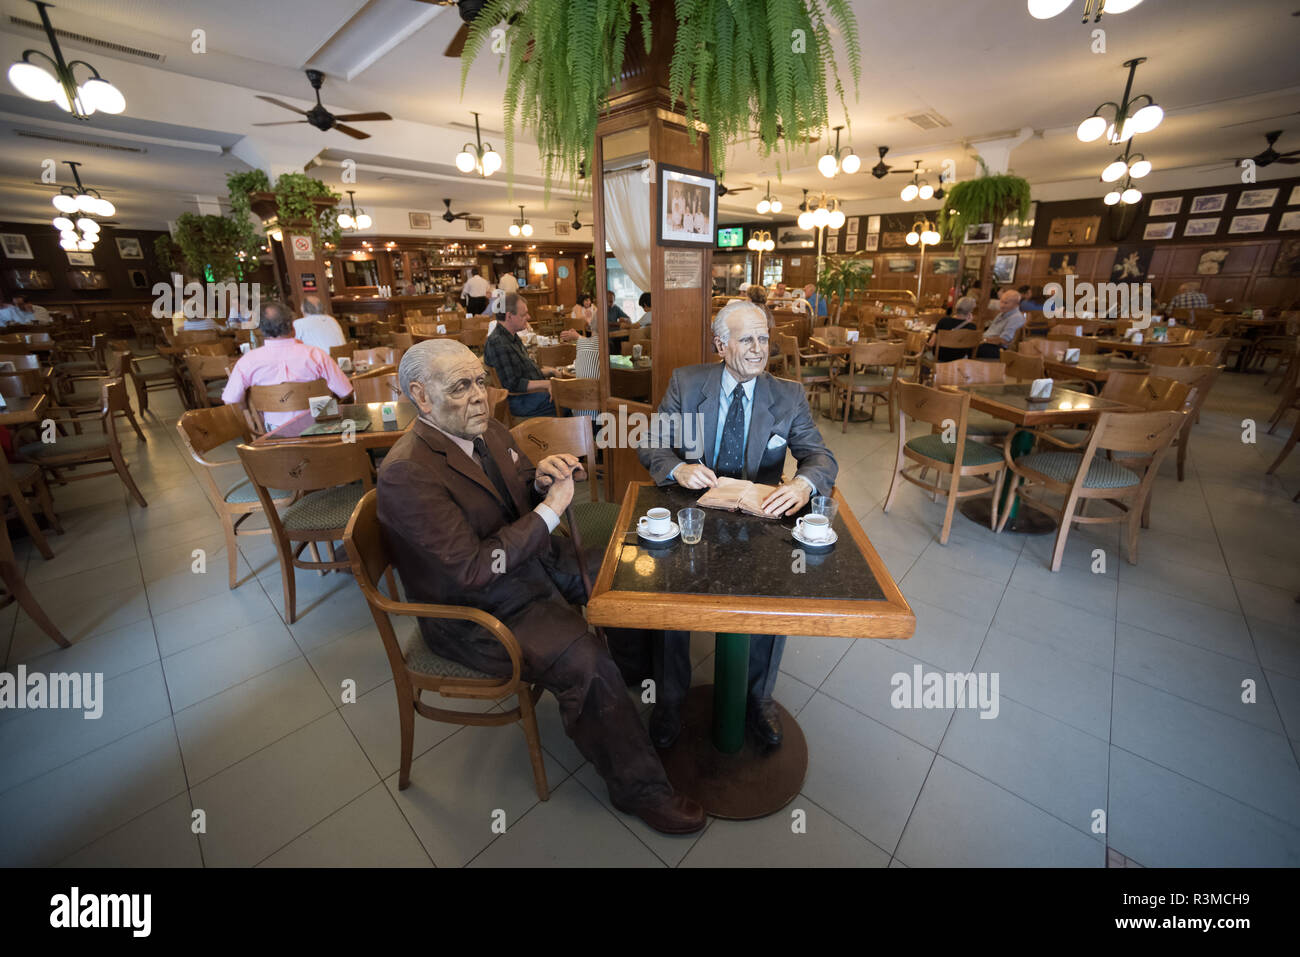 Buenos Aires, Argentina - February 8 2015: Statues of to popular writers in Latin Amercia sitting in La biela, Recoleta, Buenos Aires city. Stock Photo